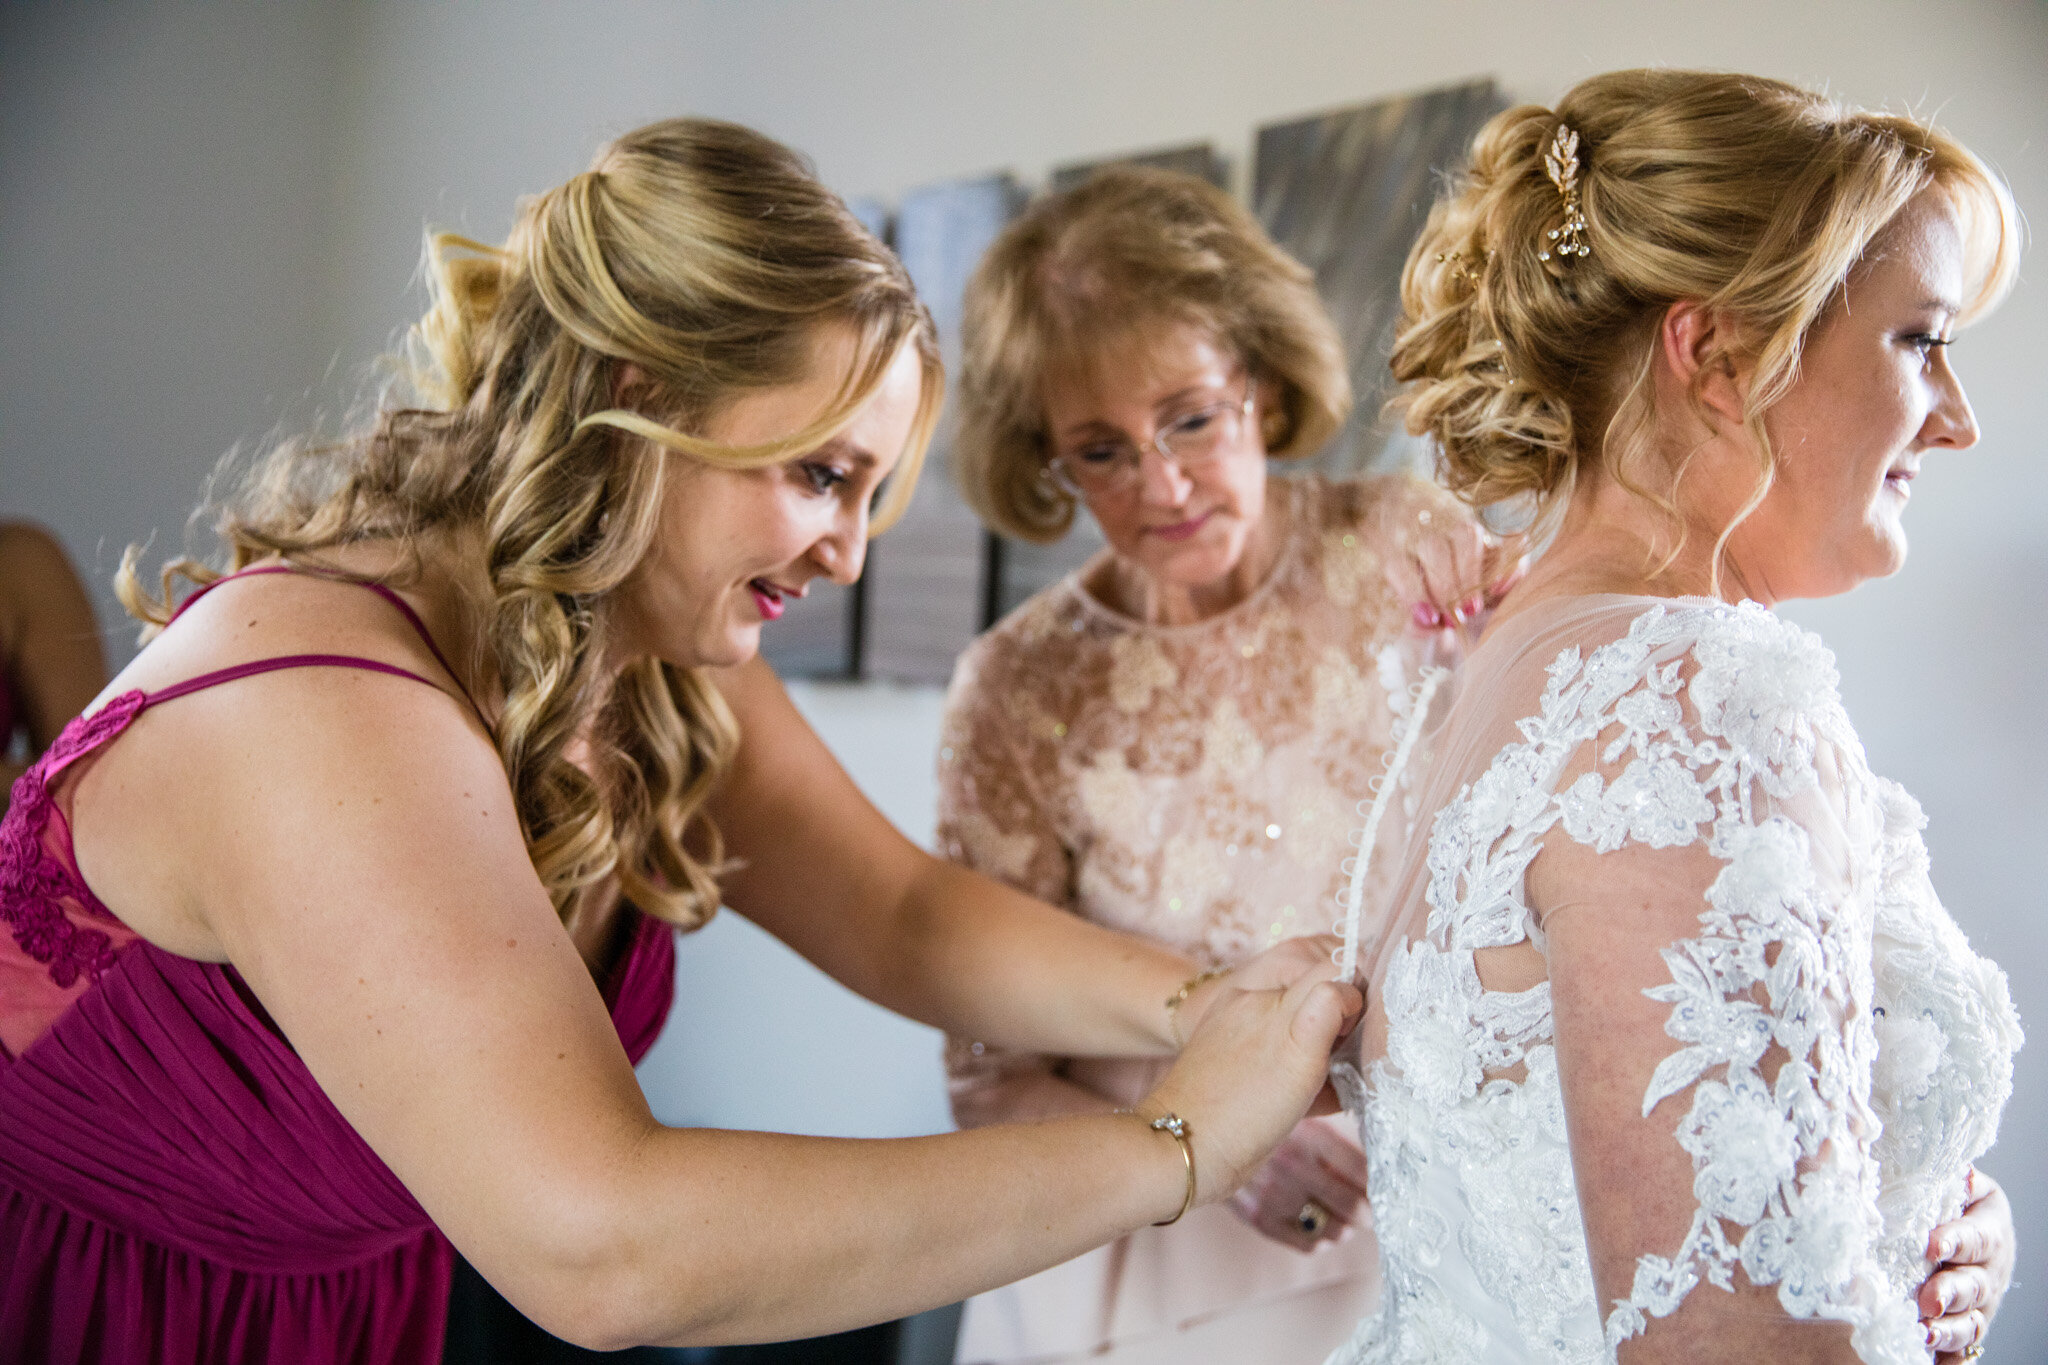 Bridesmaid helping the bride to finish putting on her dress